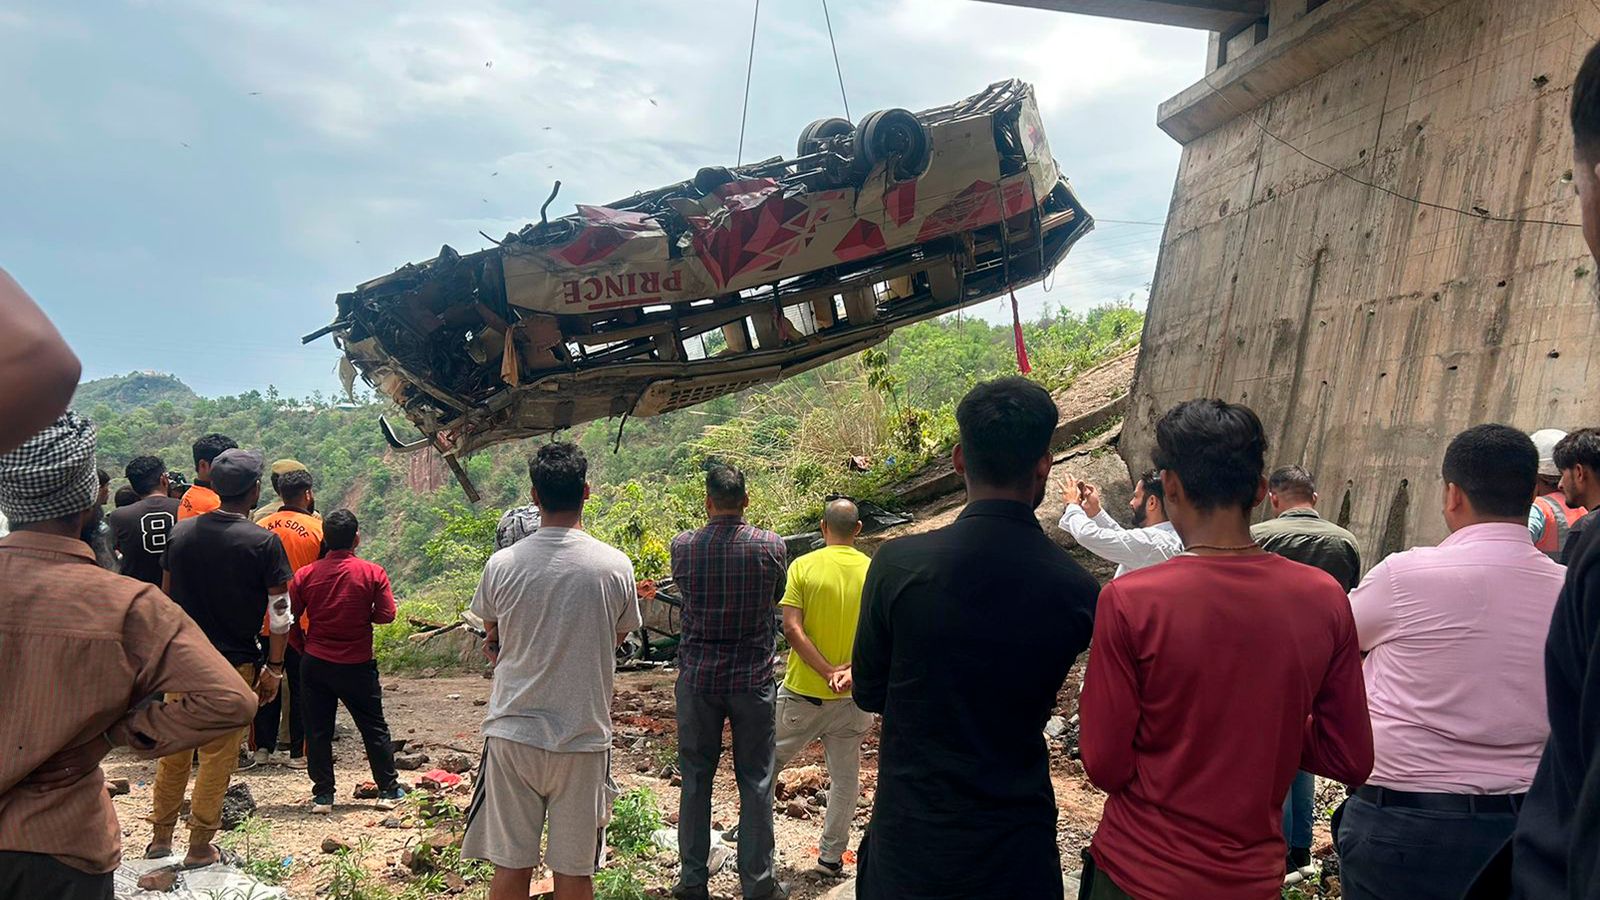 Ten people killed after 'overloaded' bus falls into gorge in India